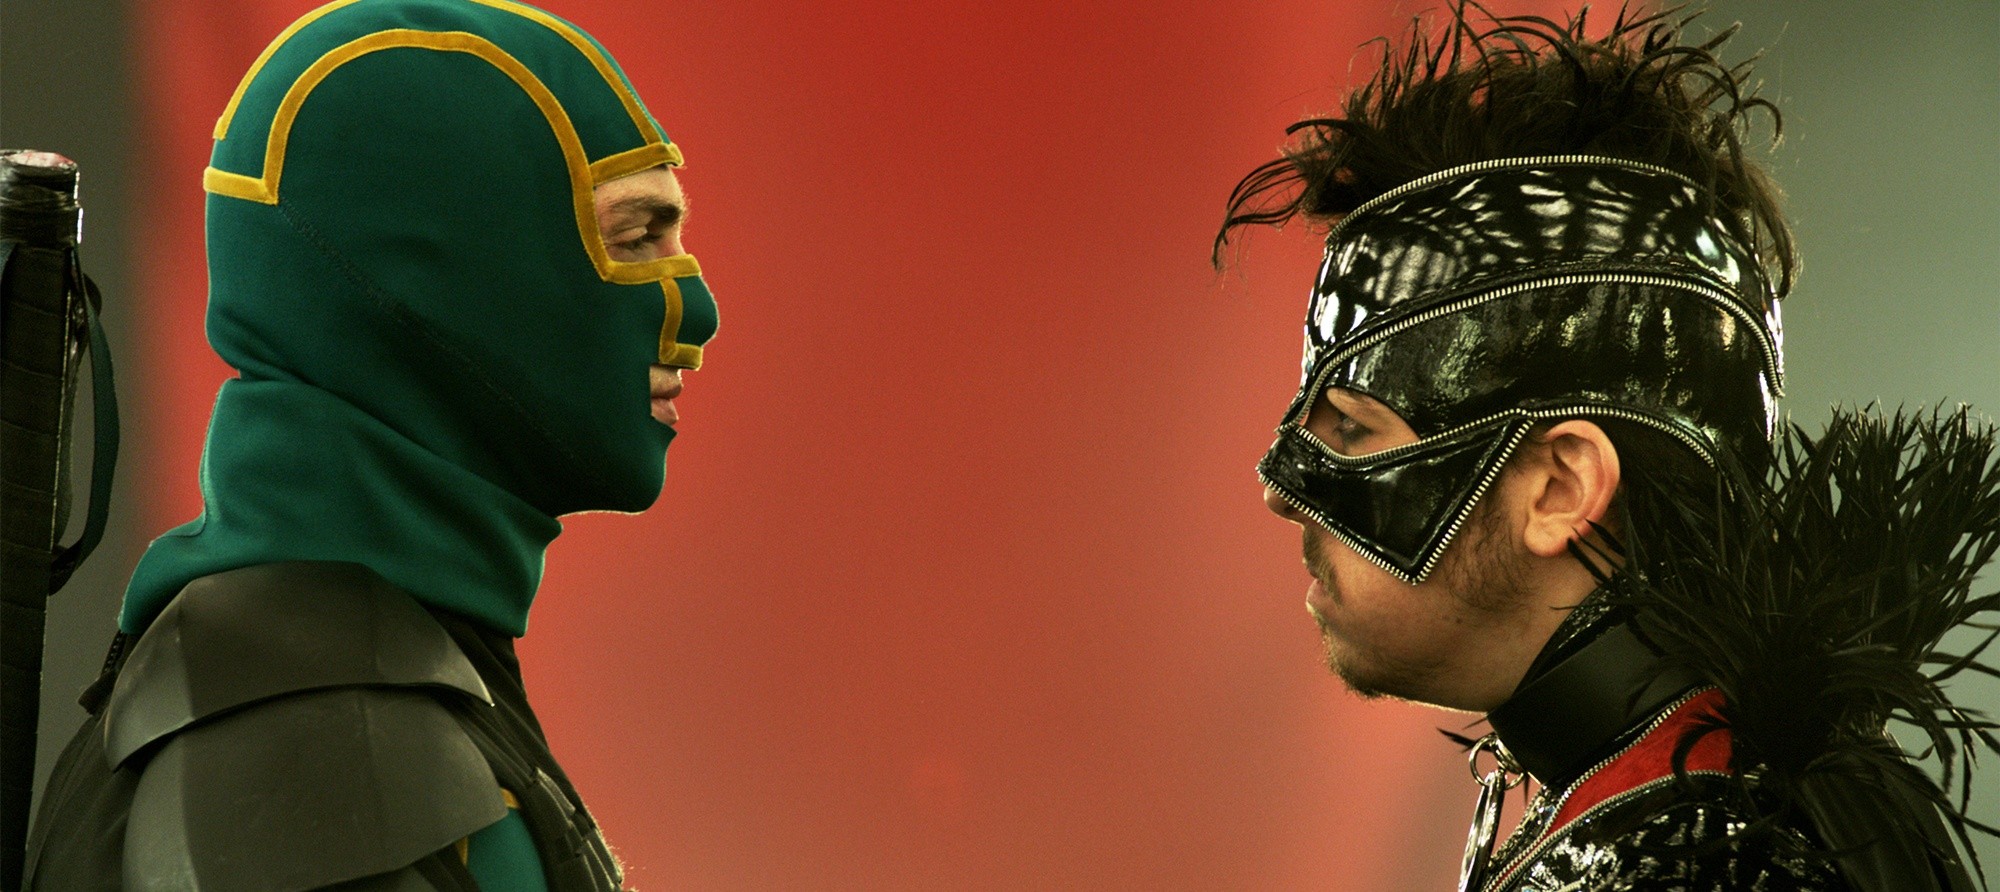 Aaron Johnson stars as 	Dave Lizewski/Kick-Ass and Christopher Mintz-Plasse stars as Chris D'Amico/The Mother Fucker in Universal Pictures' Kick-Ass 2 (2013)